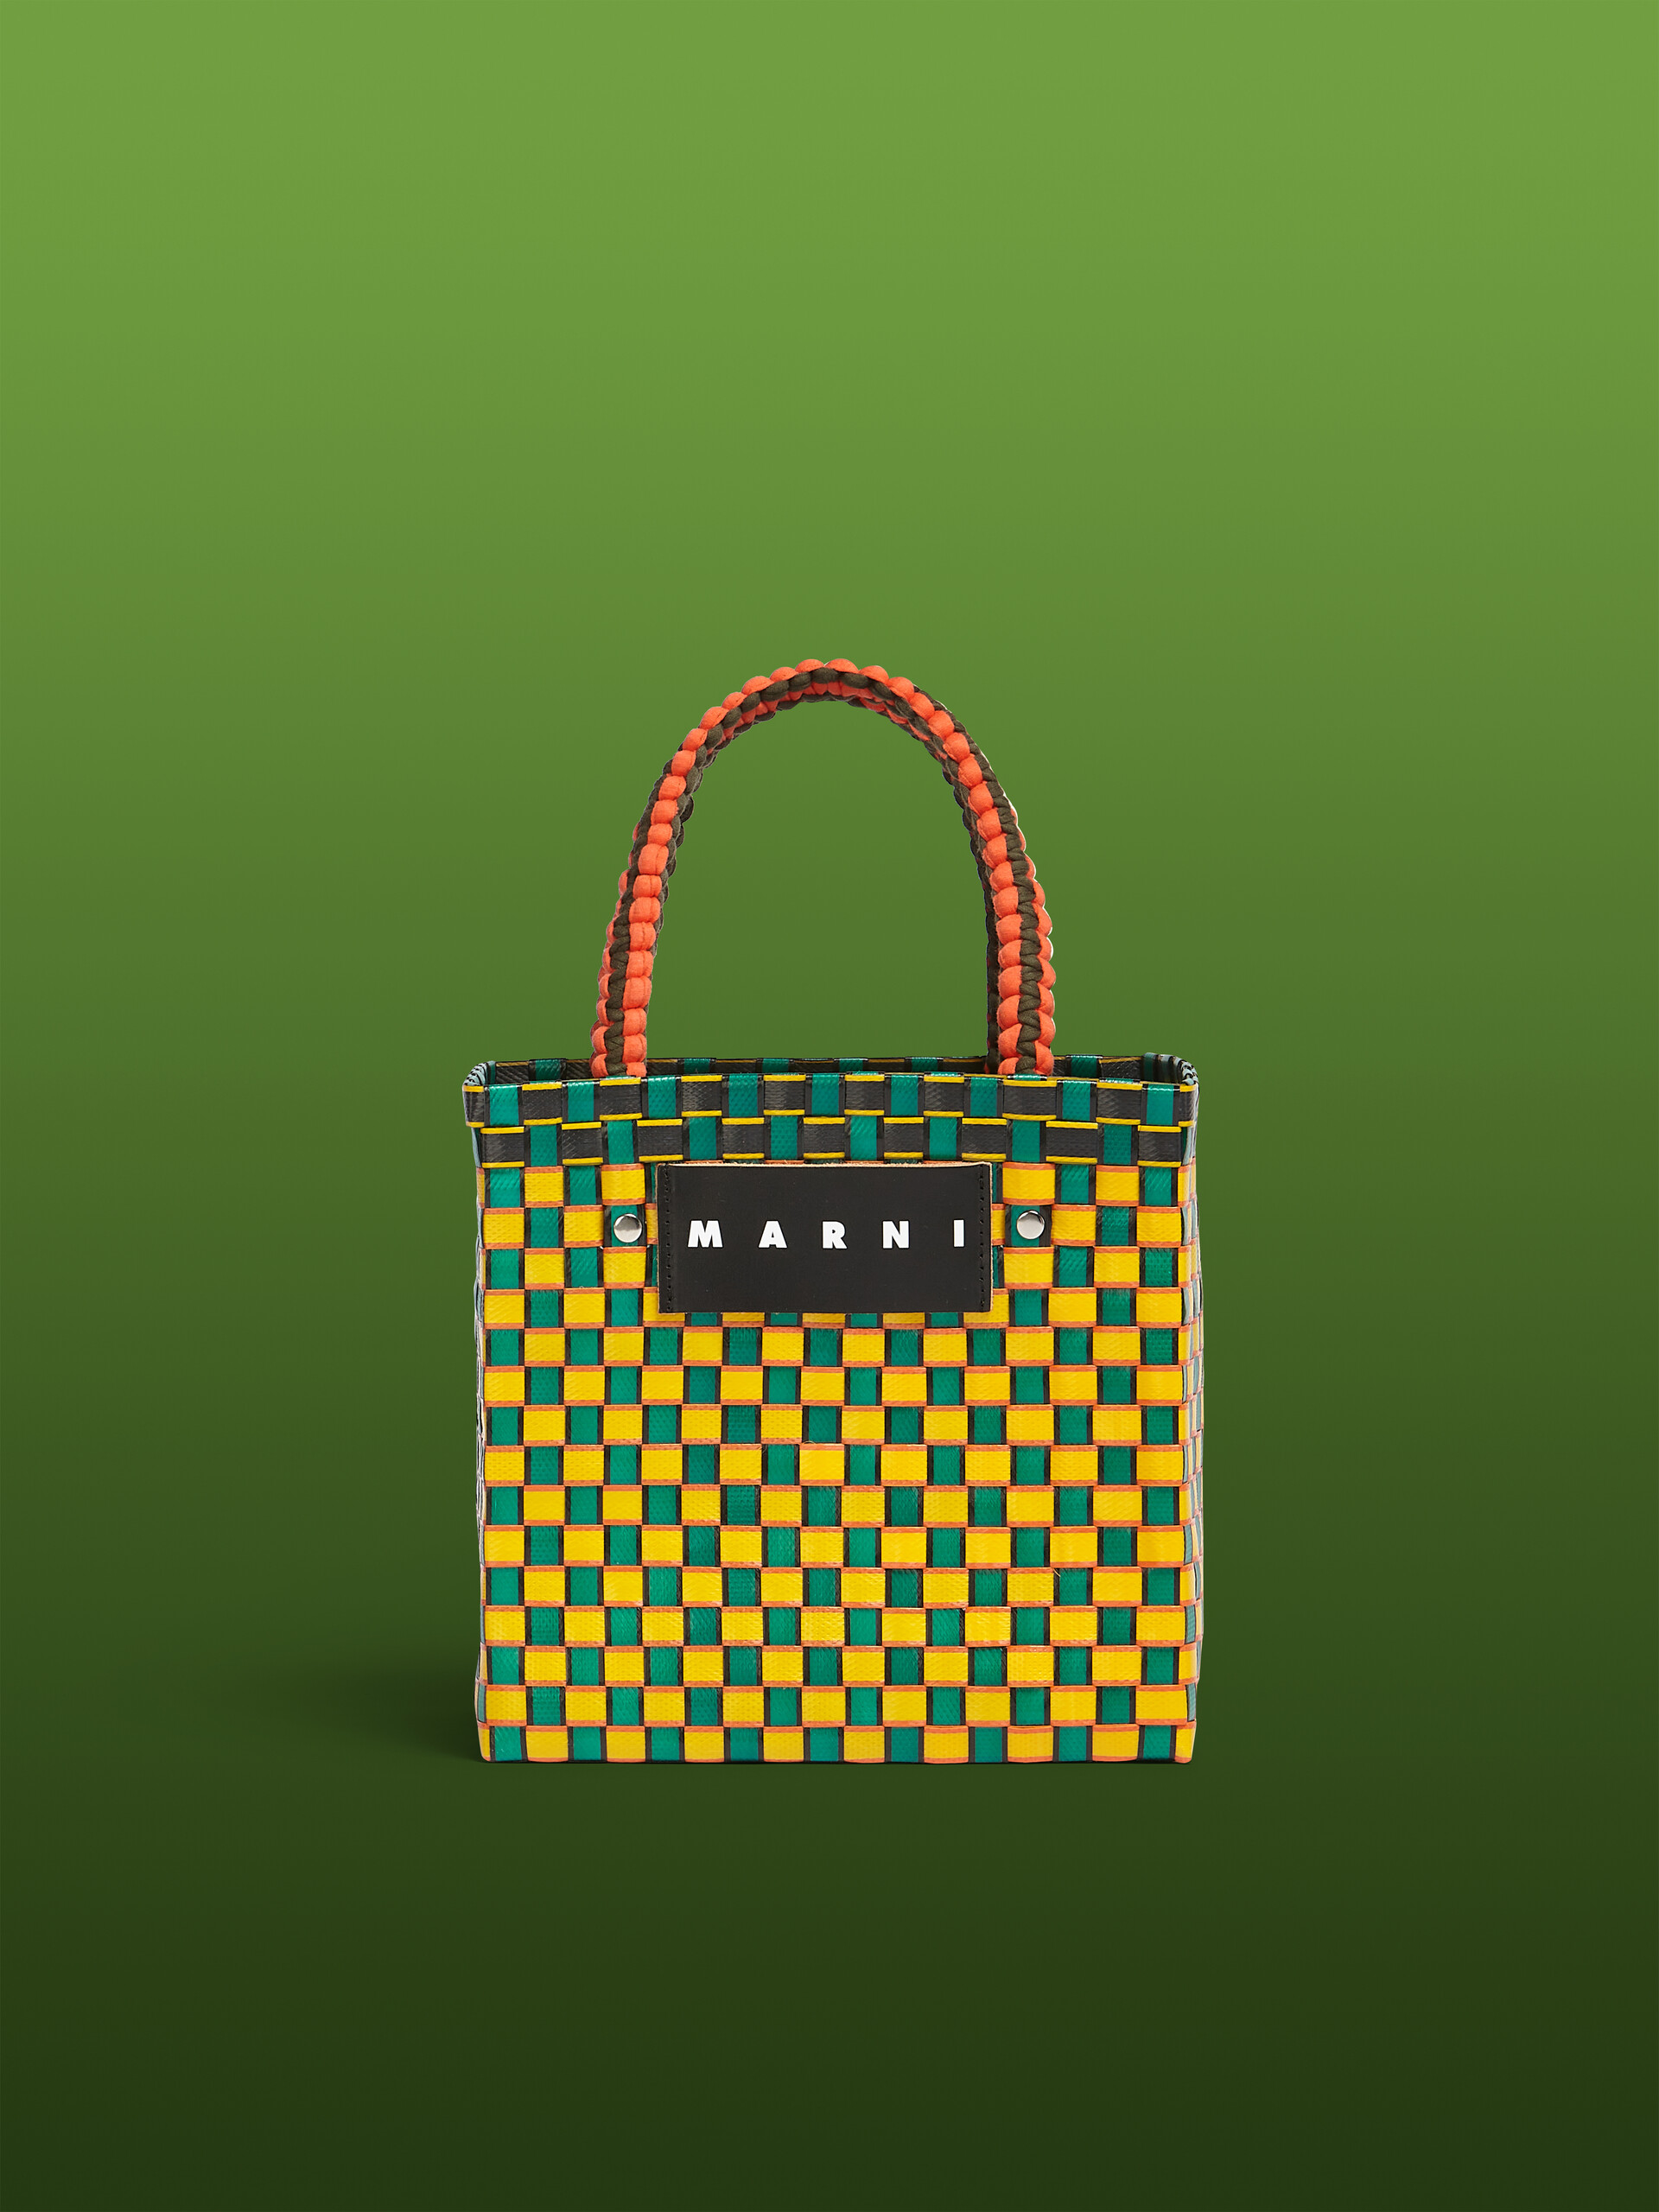 MARNI MARKET BASKET bag in yellow square woven material